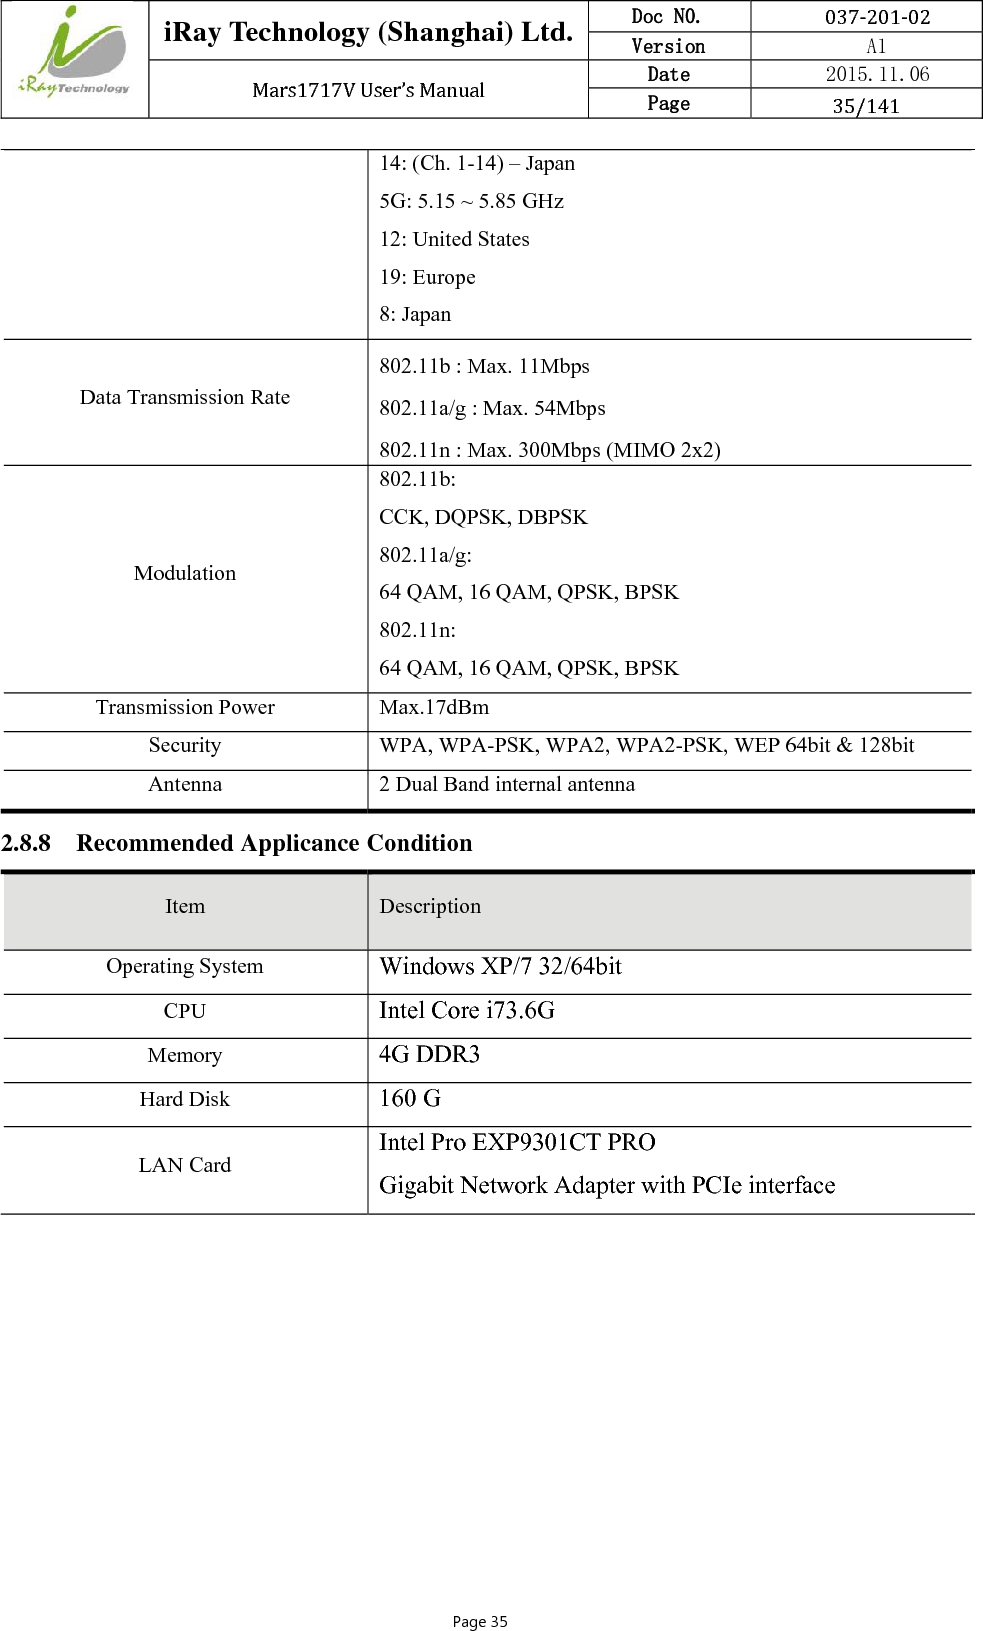  iRay Technology (Shanghai) Ltd. Doc N0.  037‐201‐02 Version    A1 Mars1717VUser’sManual Date  2015.11.06 Page  35/141Page 35 14: (Ch. 1-14) – Japan 5G: 5.15 ~ 5.85 GHz 12: United States 19: Europe 8: Japan Data Transmission Rate 802.11b : Max. 11Mbps 802.11a/g : Max. 54Mbps 802.11n : Max. 300Mbps (MIMO 2x2) Modulation 802.11b: CCK, DQPSK, DBPSK 802.11a/g: 64 QAM, 16 QAM, QPSK, BPSK 802.11n: 64 QAM, 16 QAM, QPSK, BPSK Transmission Power  Max.17dBm Security  WPA, WPA-PSK, WPA2, WPA2-PSK, WEP 64bit &amp; 128bit Antenna  2 Dual Band internal antenna 2.8.8 Recommended Applicance Condition Item  Description Operating System  Windows XP/7 32/64bit CPU  Intel Core i73.6G Memory  4G DDR3 Hard Disk  160 G LAN Card Intel Pro EXP9301CT PRO Gigabit Network Adapter with PCIe interface 